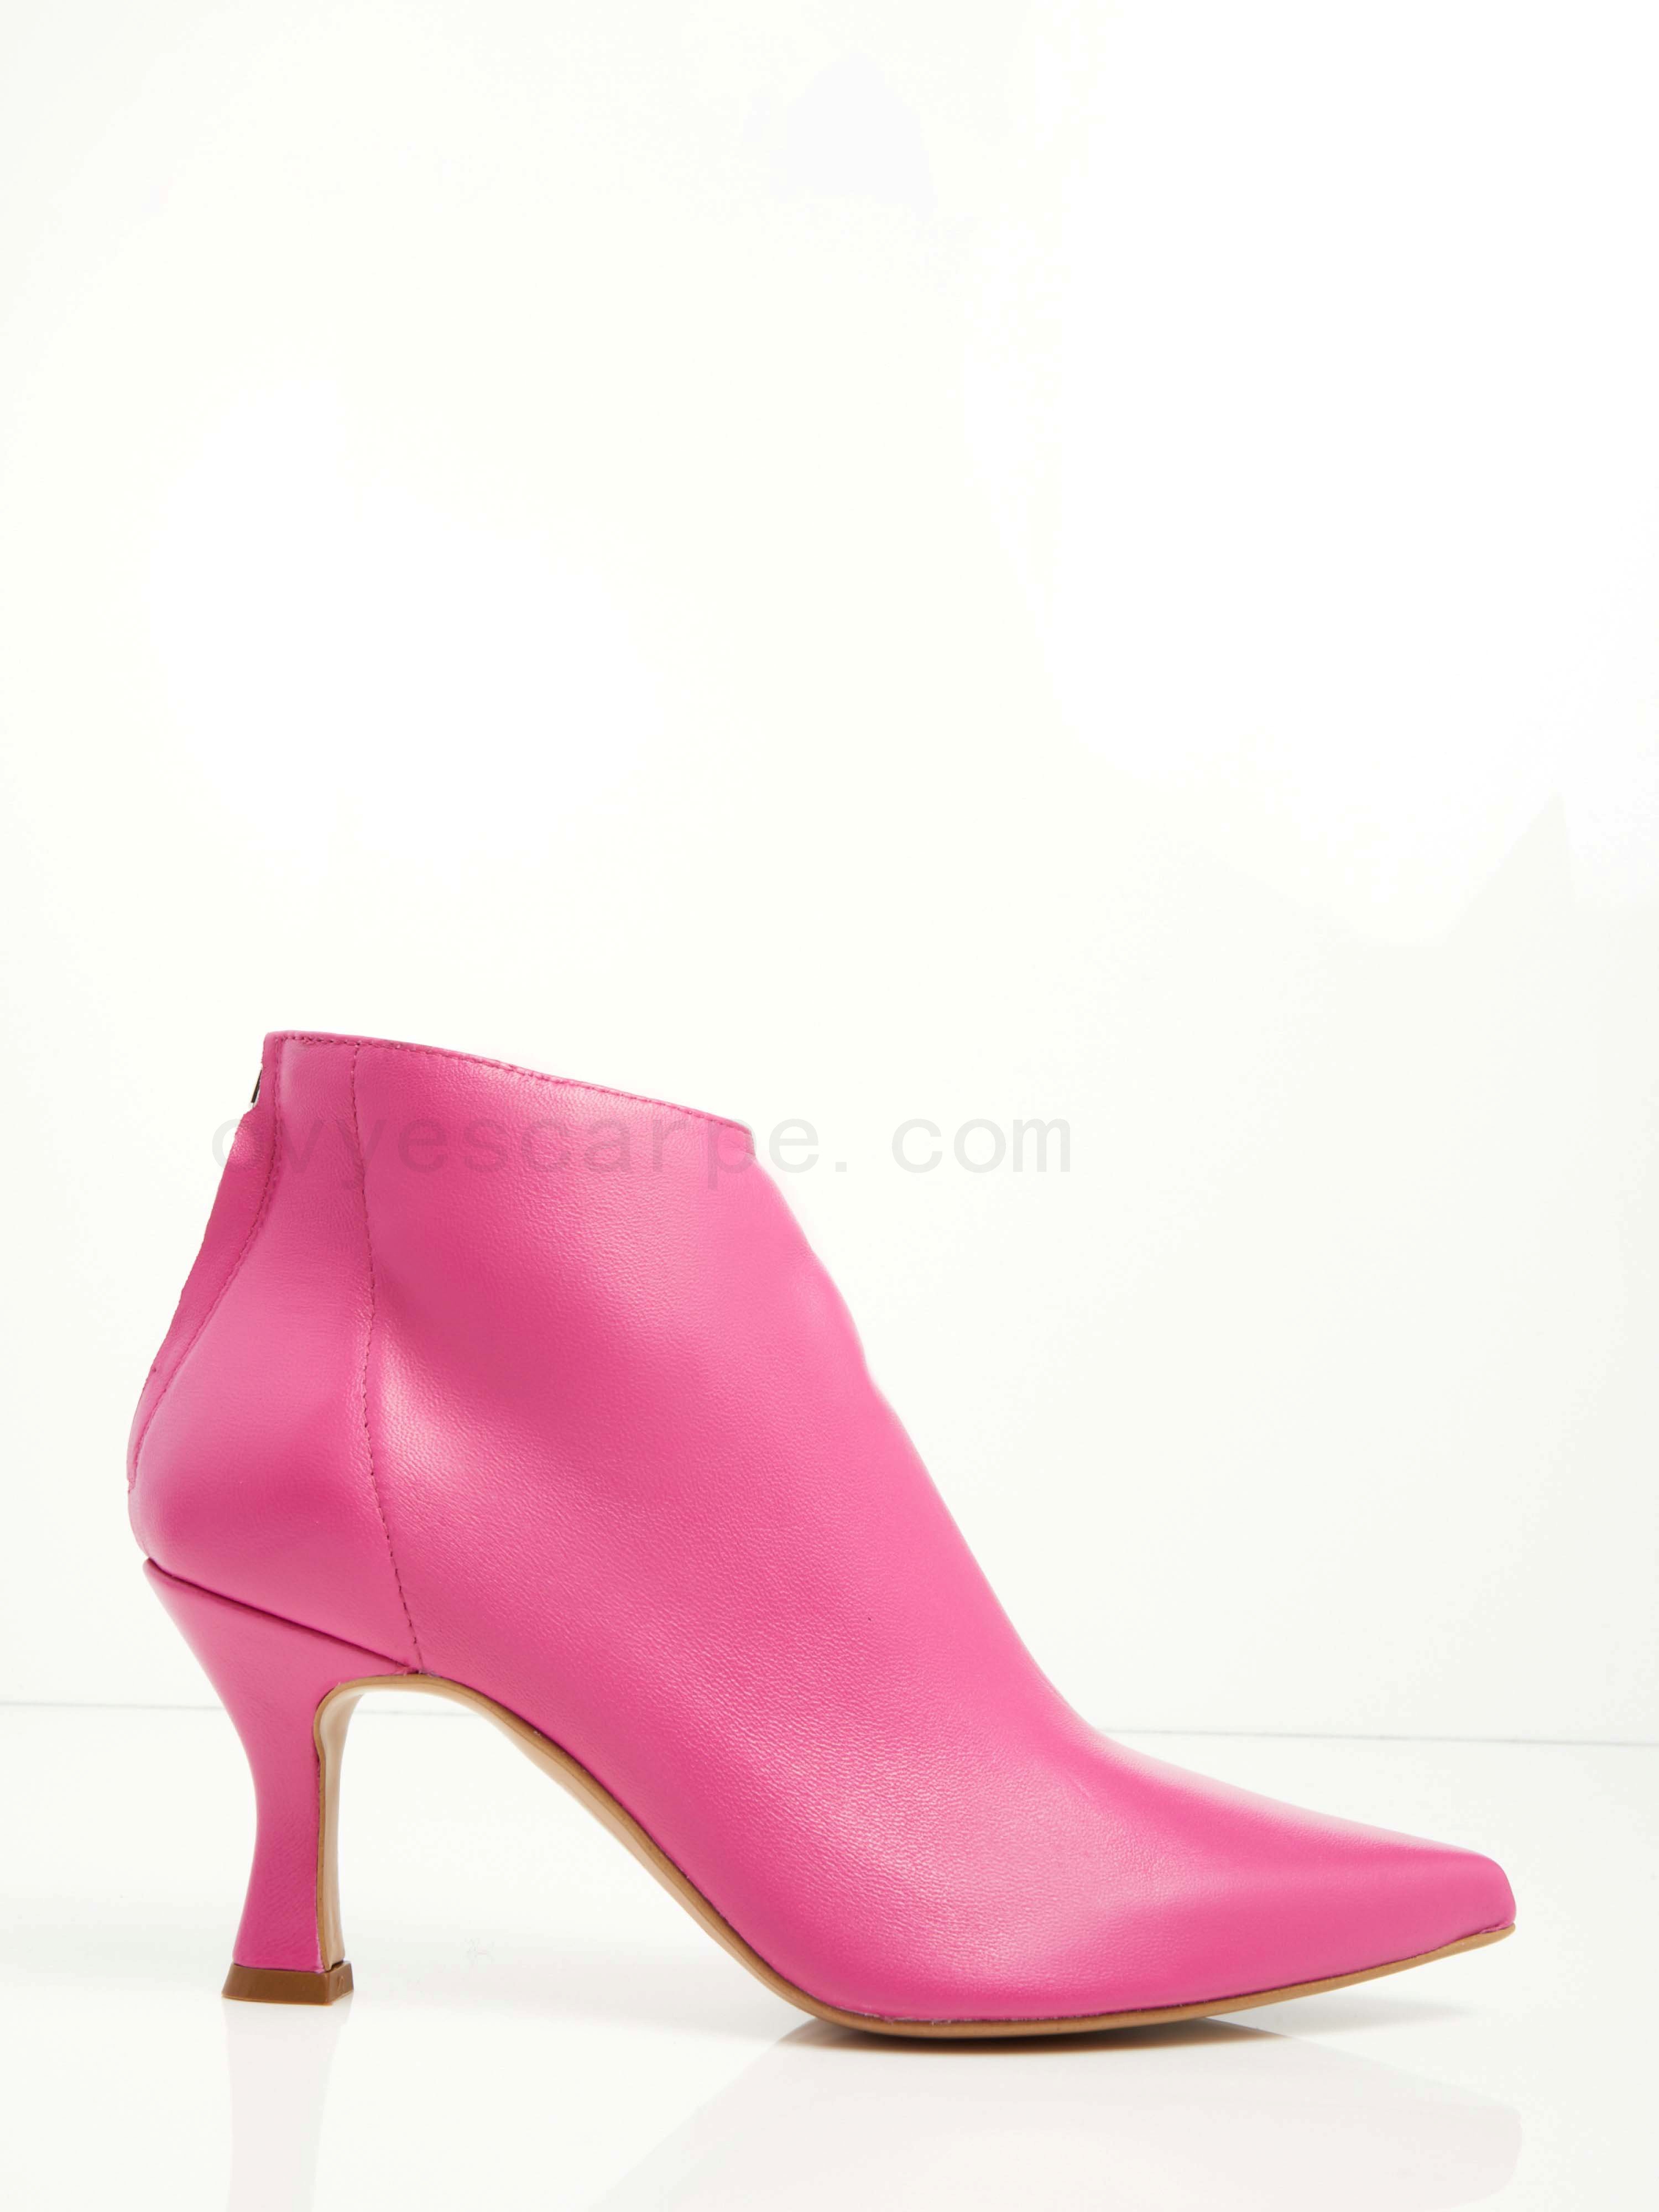 Leather Ankle Boots F08161027-0416 In Saldo